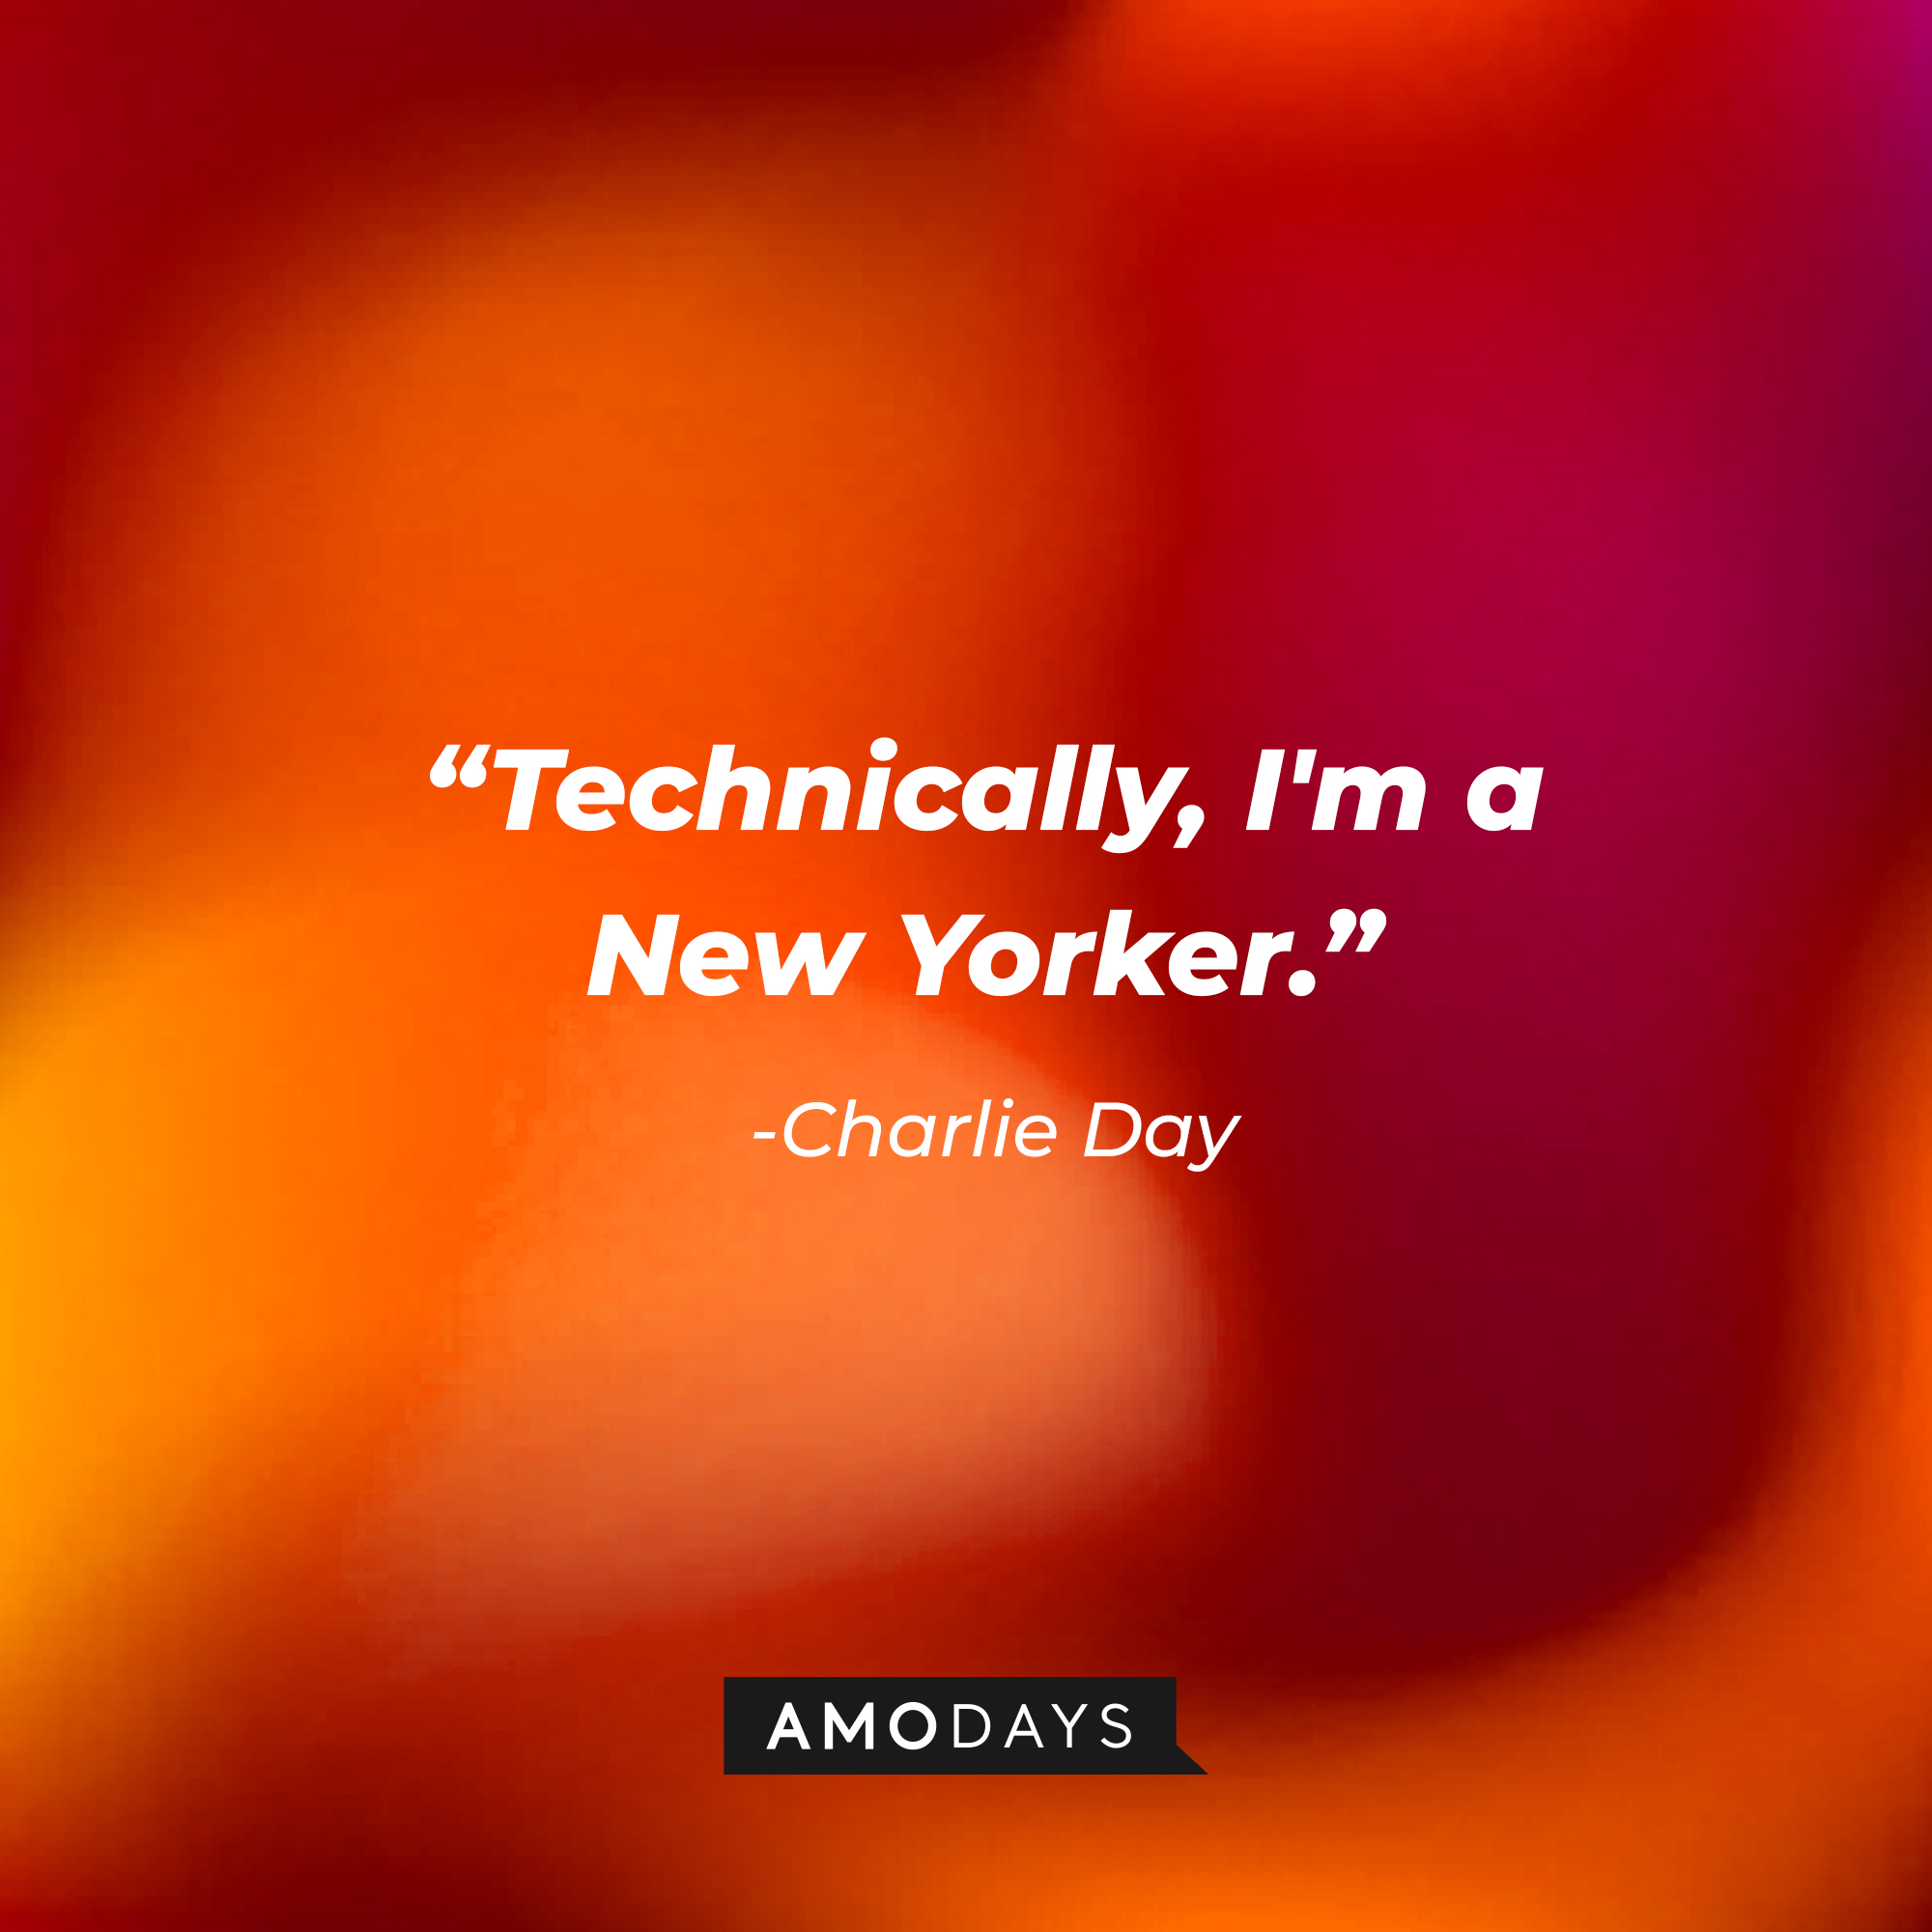 Charlie Day’s quote: “Technically, I'm a New Yorker.” | Source: AmoDays